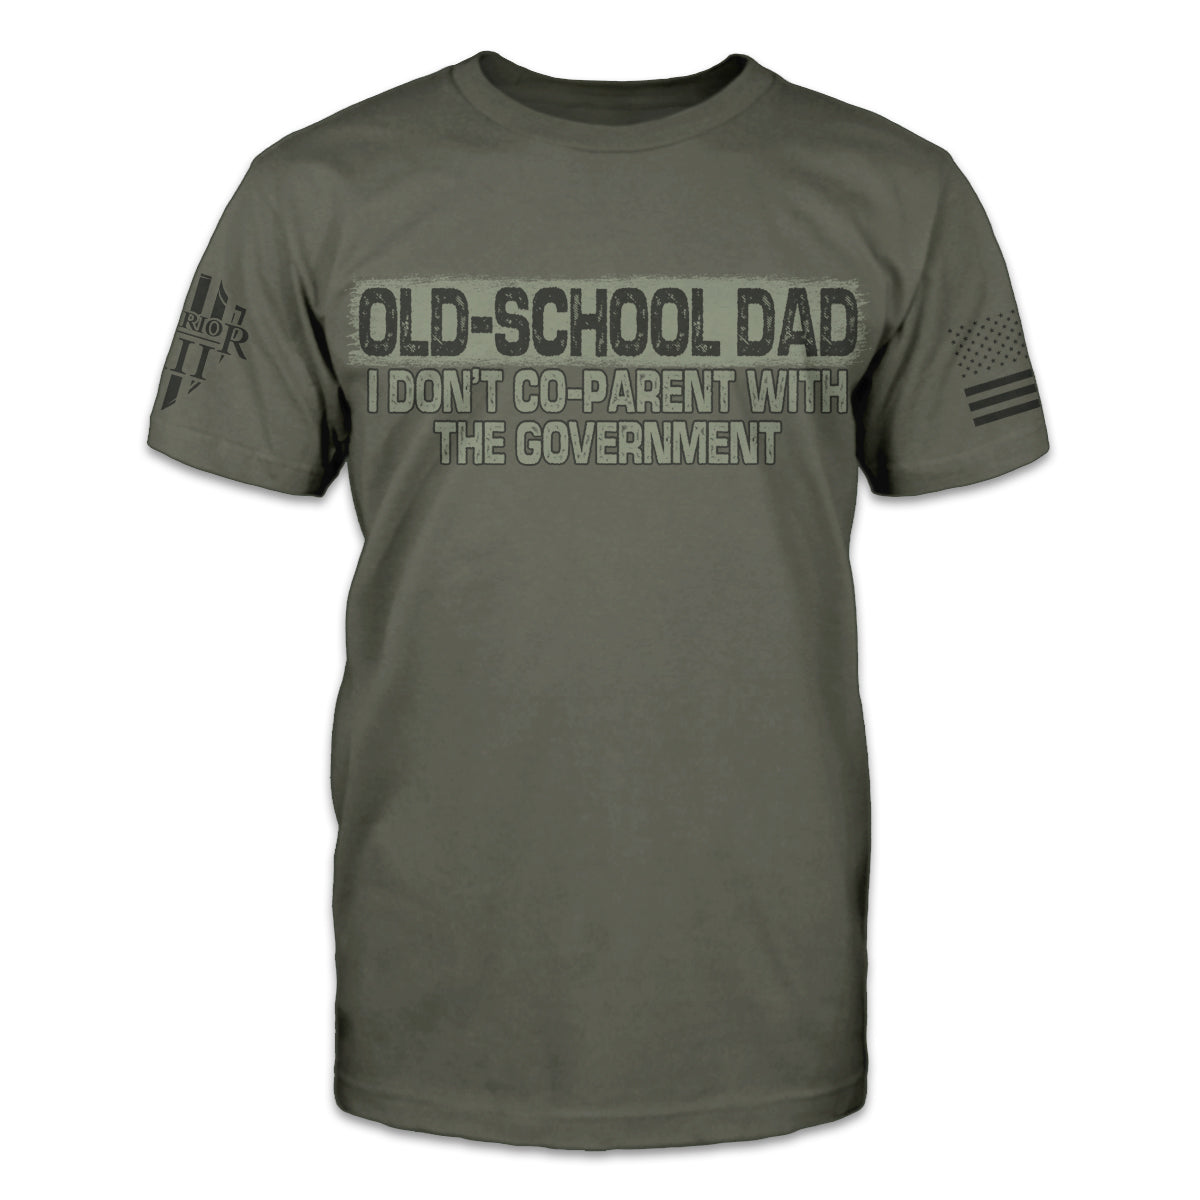 A green t-shirt which features the words "Old-School Dad - I don't co-parent with the government" on the front